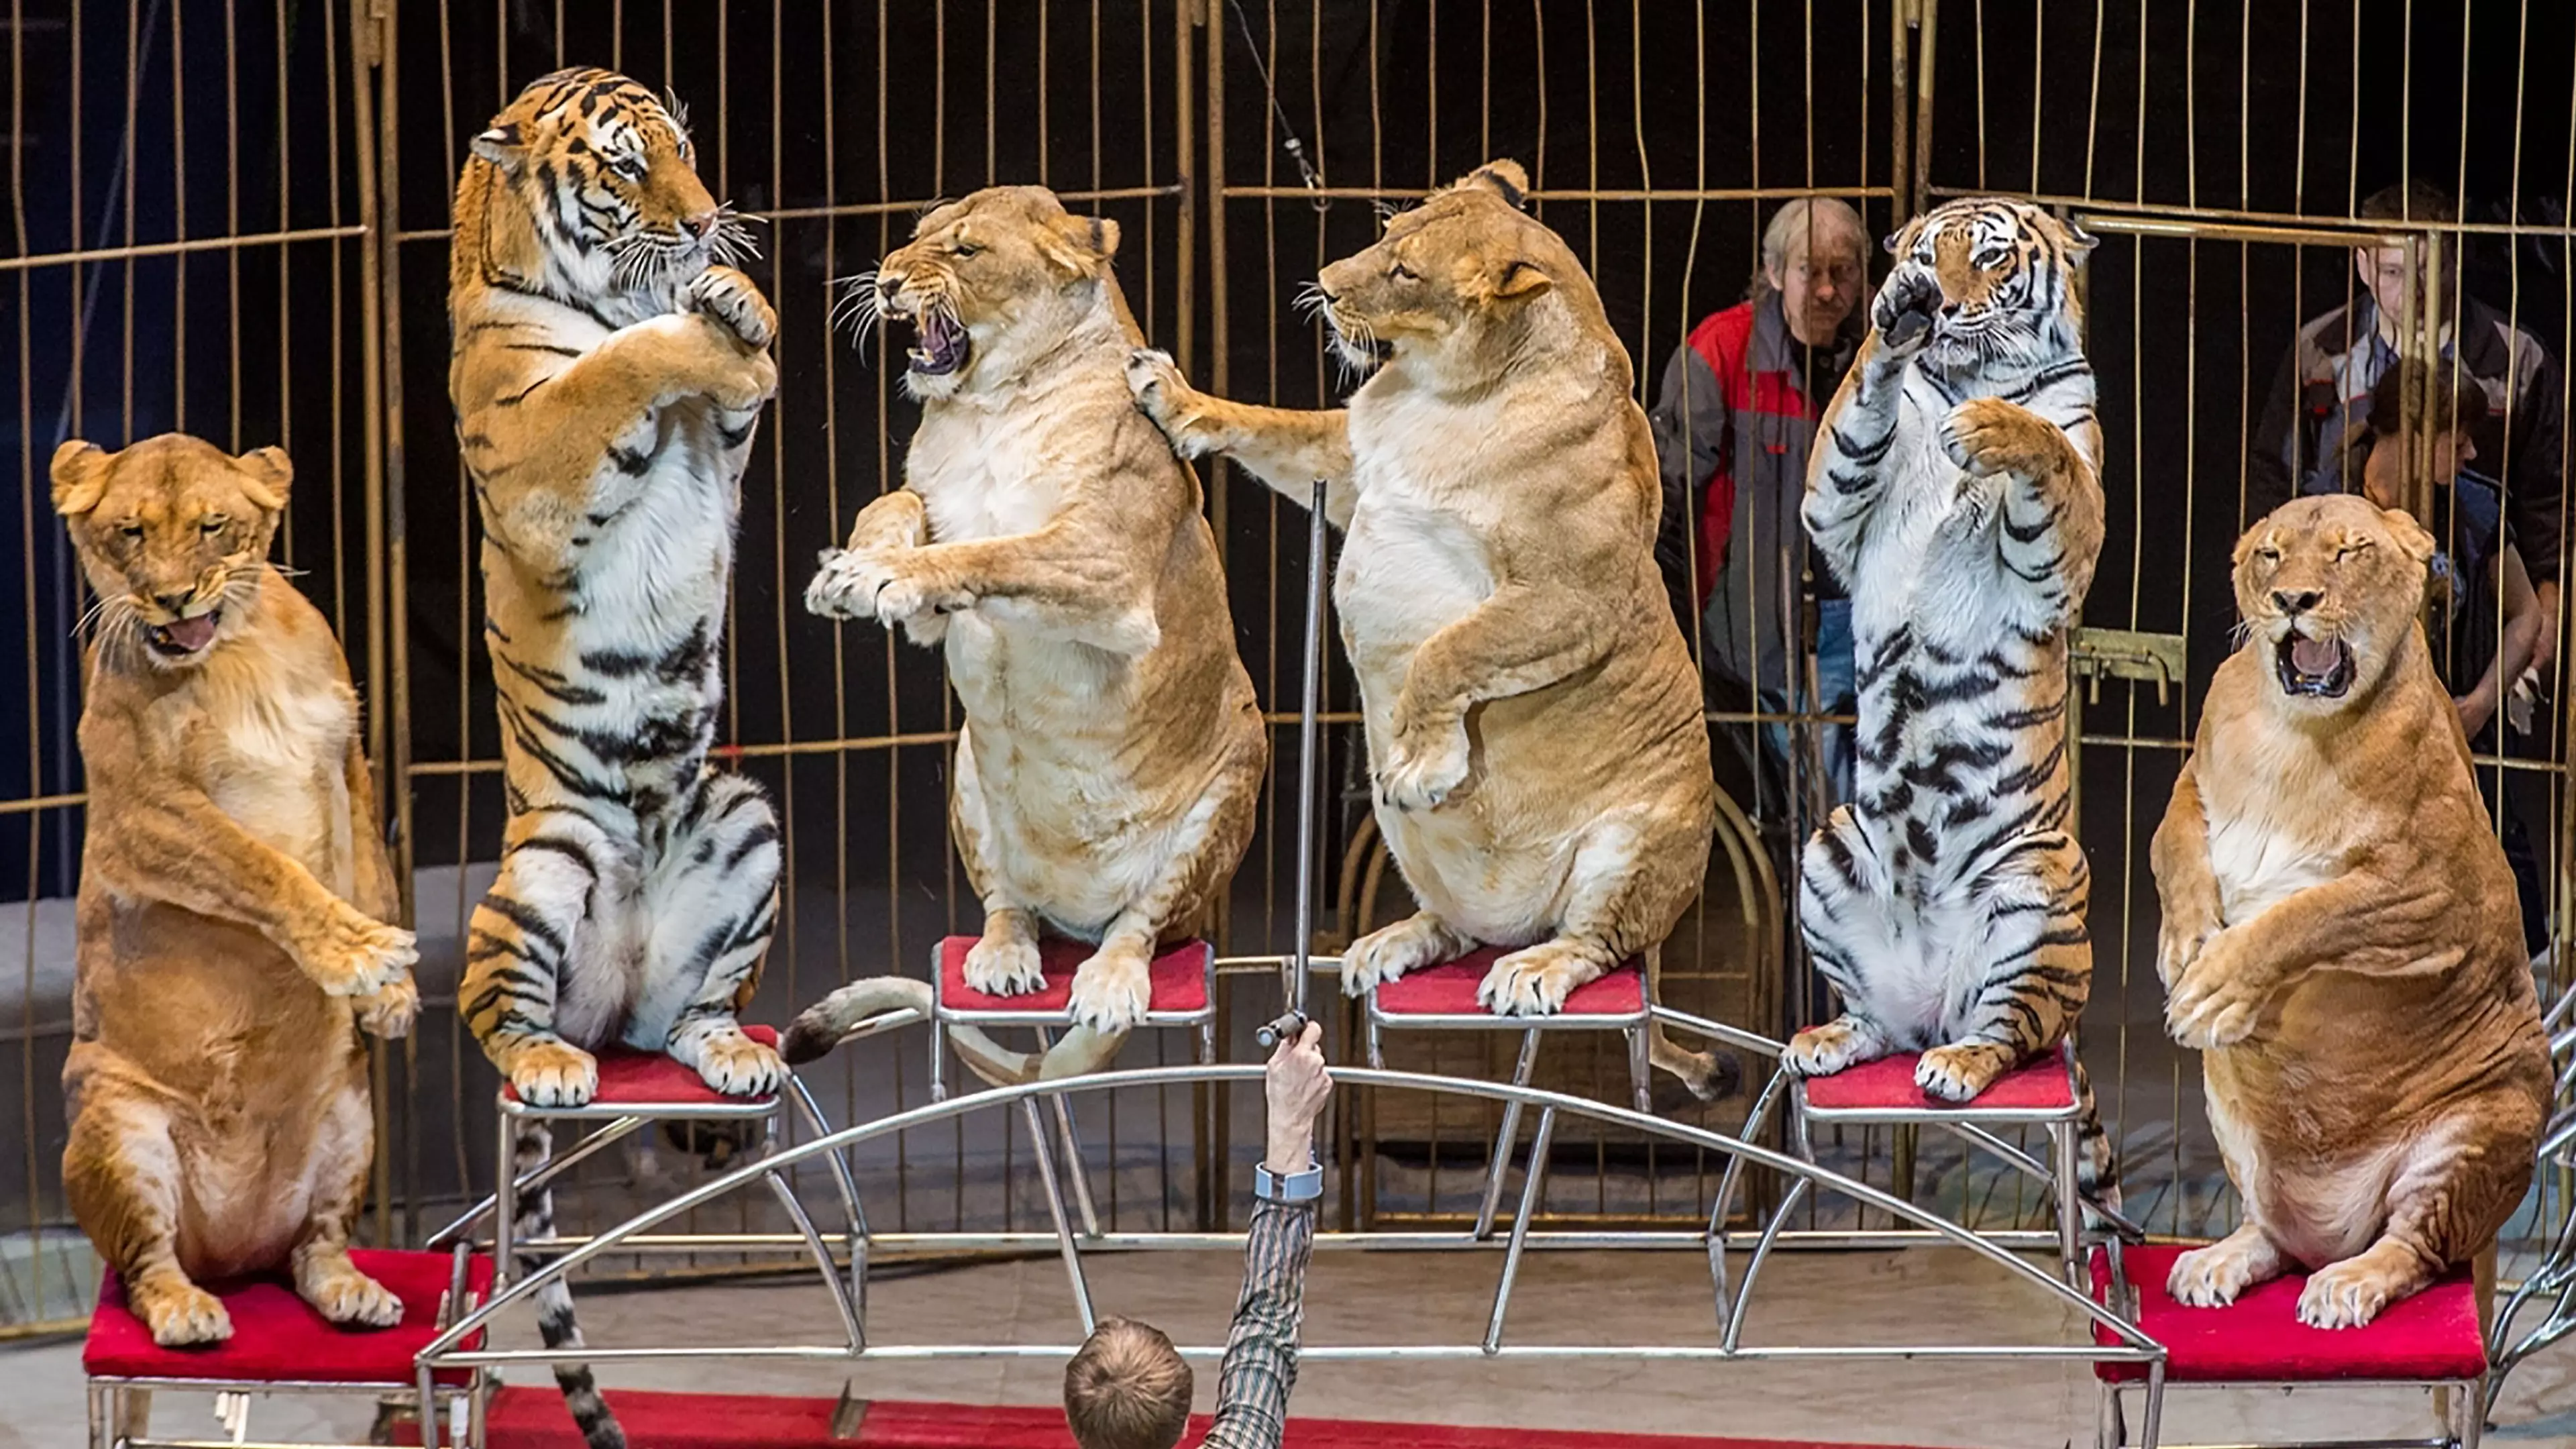 Row Emerges As 'Fat' Lions And Tigers Perform At Circus In Russia